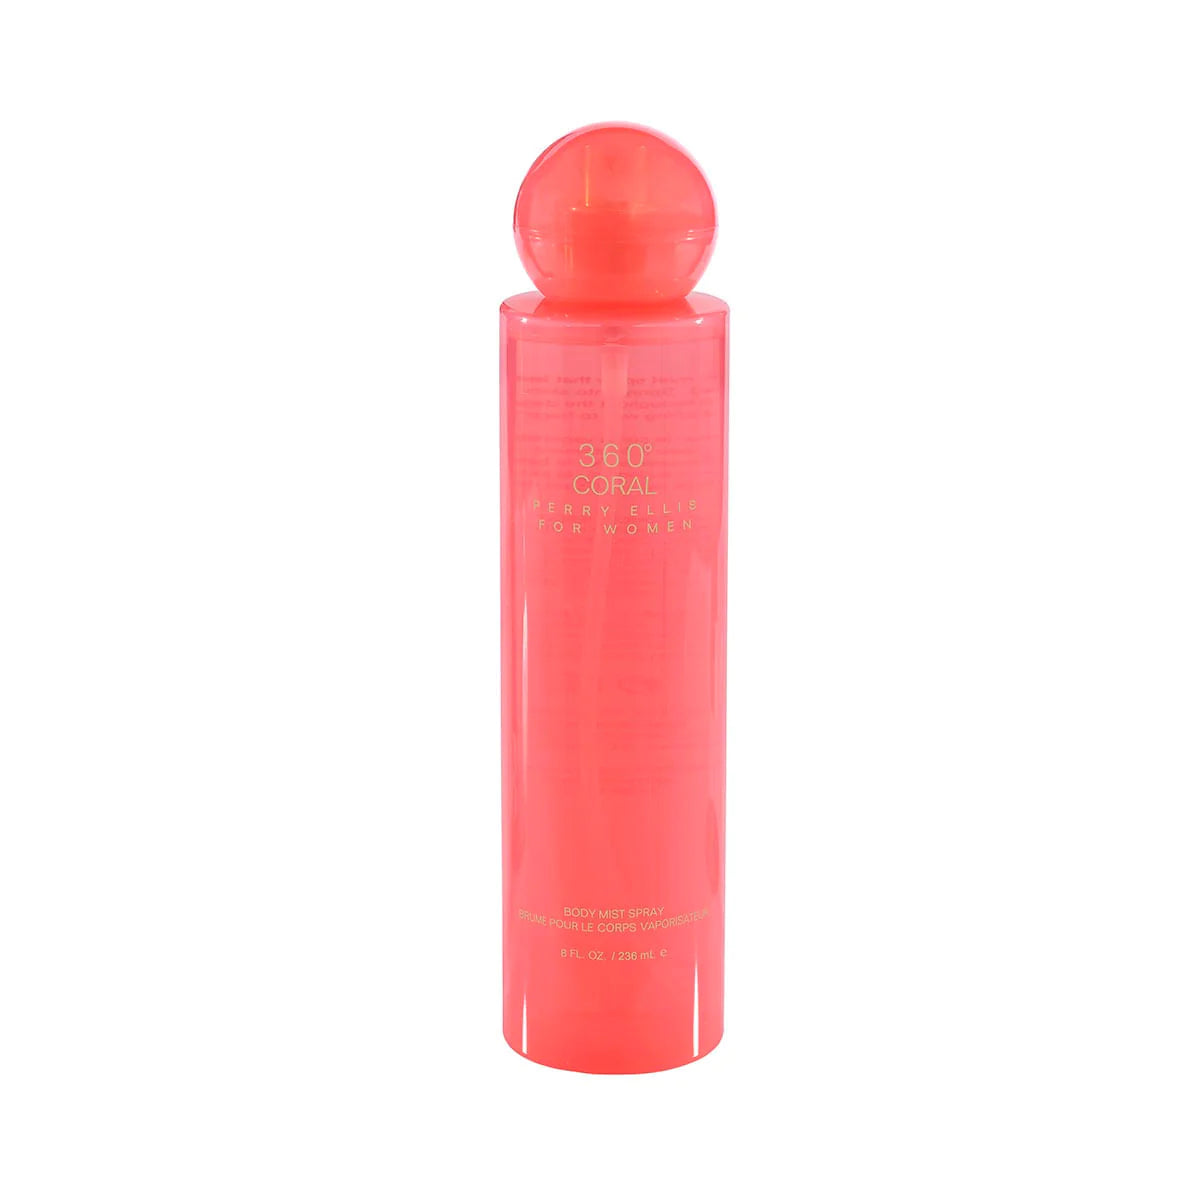 360 Coral Body Mist for women - Perfume Planet 